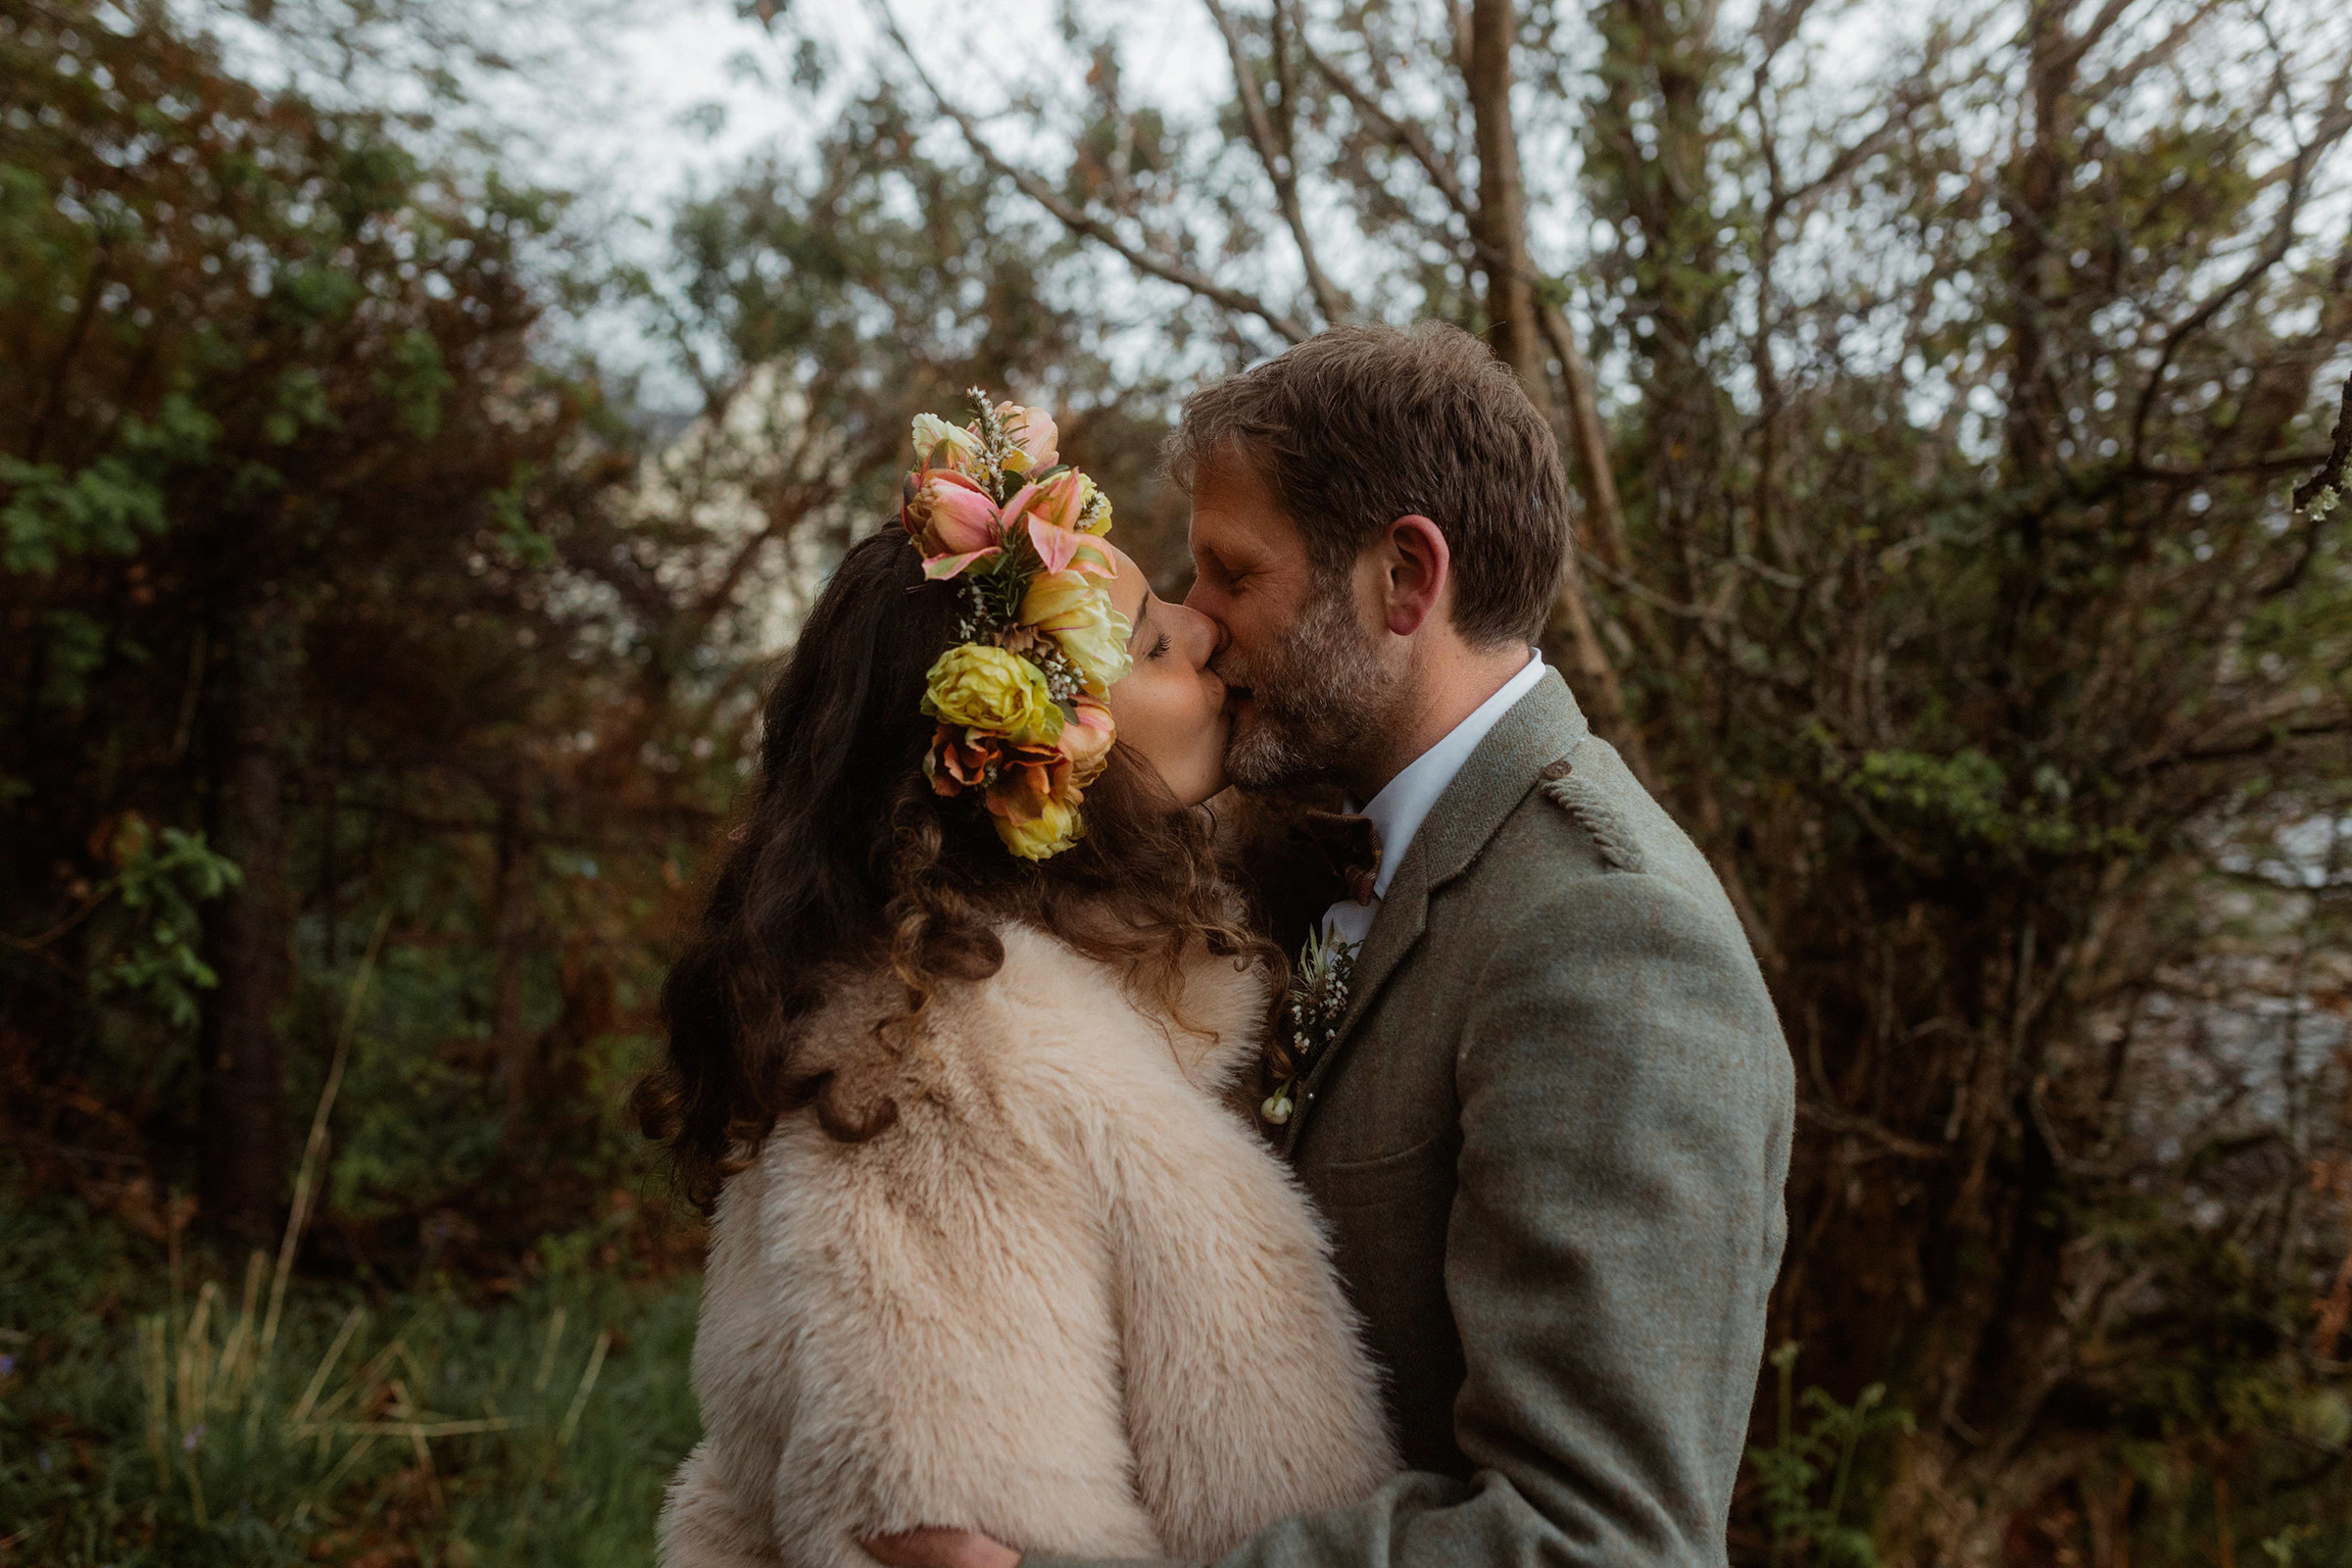 Rebecca and Simon shared an intimate moment after their elopement ceremony at the Isle of Skye, Scotland